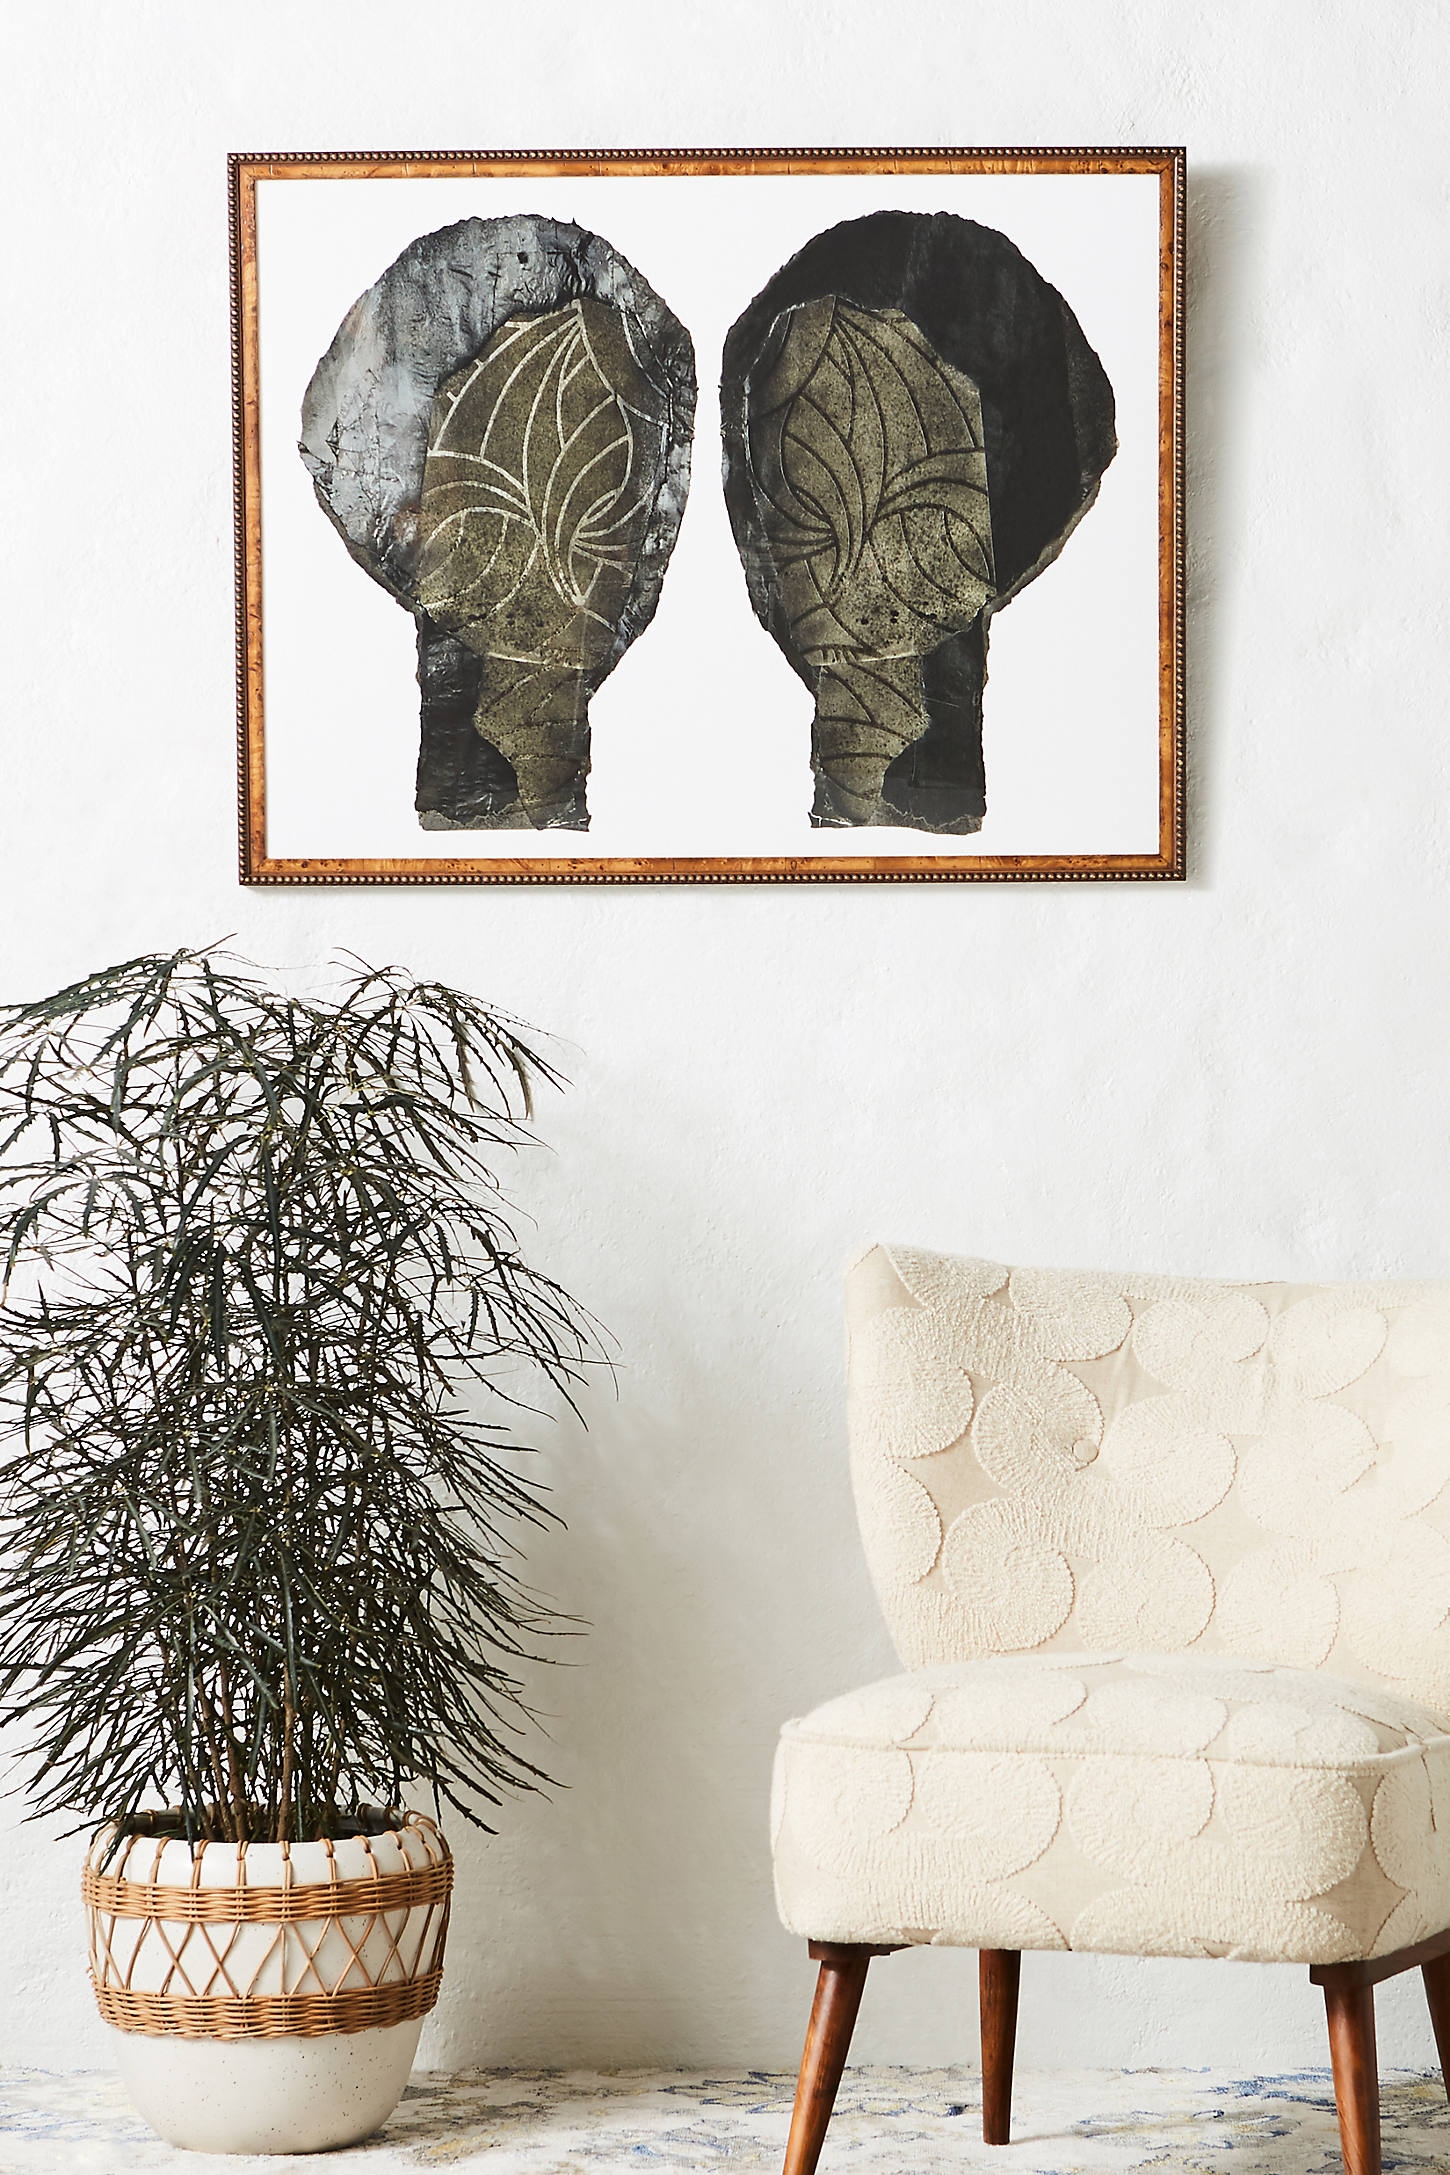 Two Heads Wall Art - Image 0